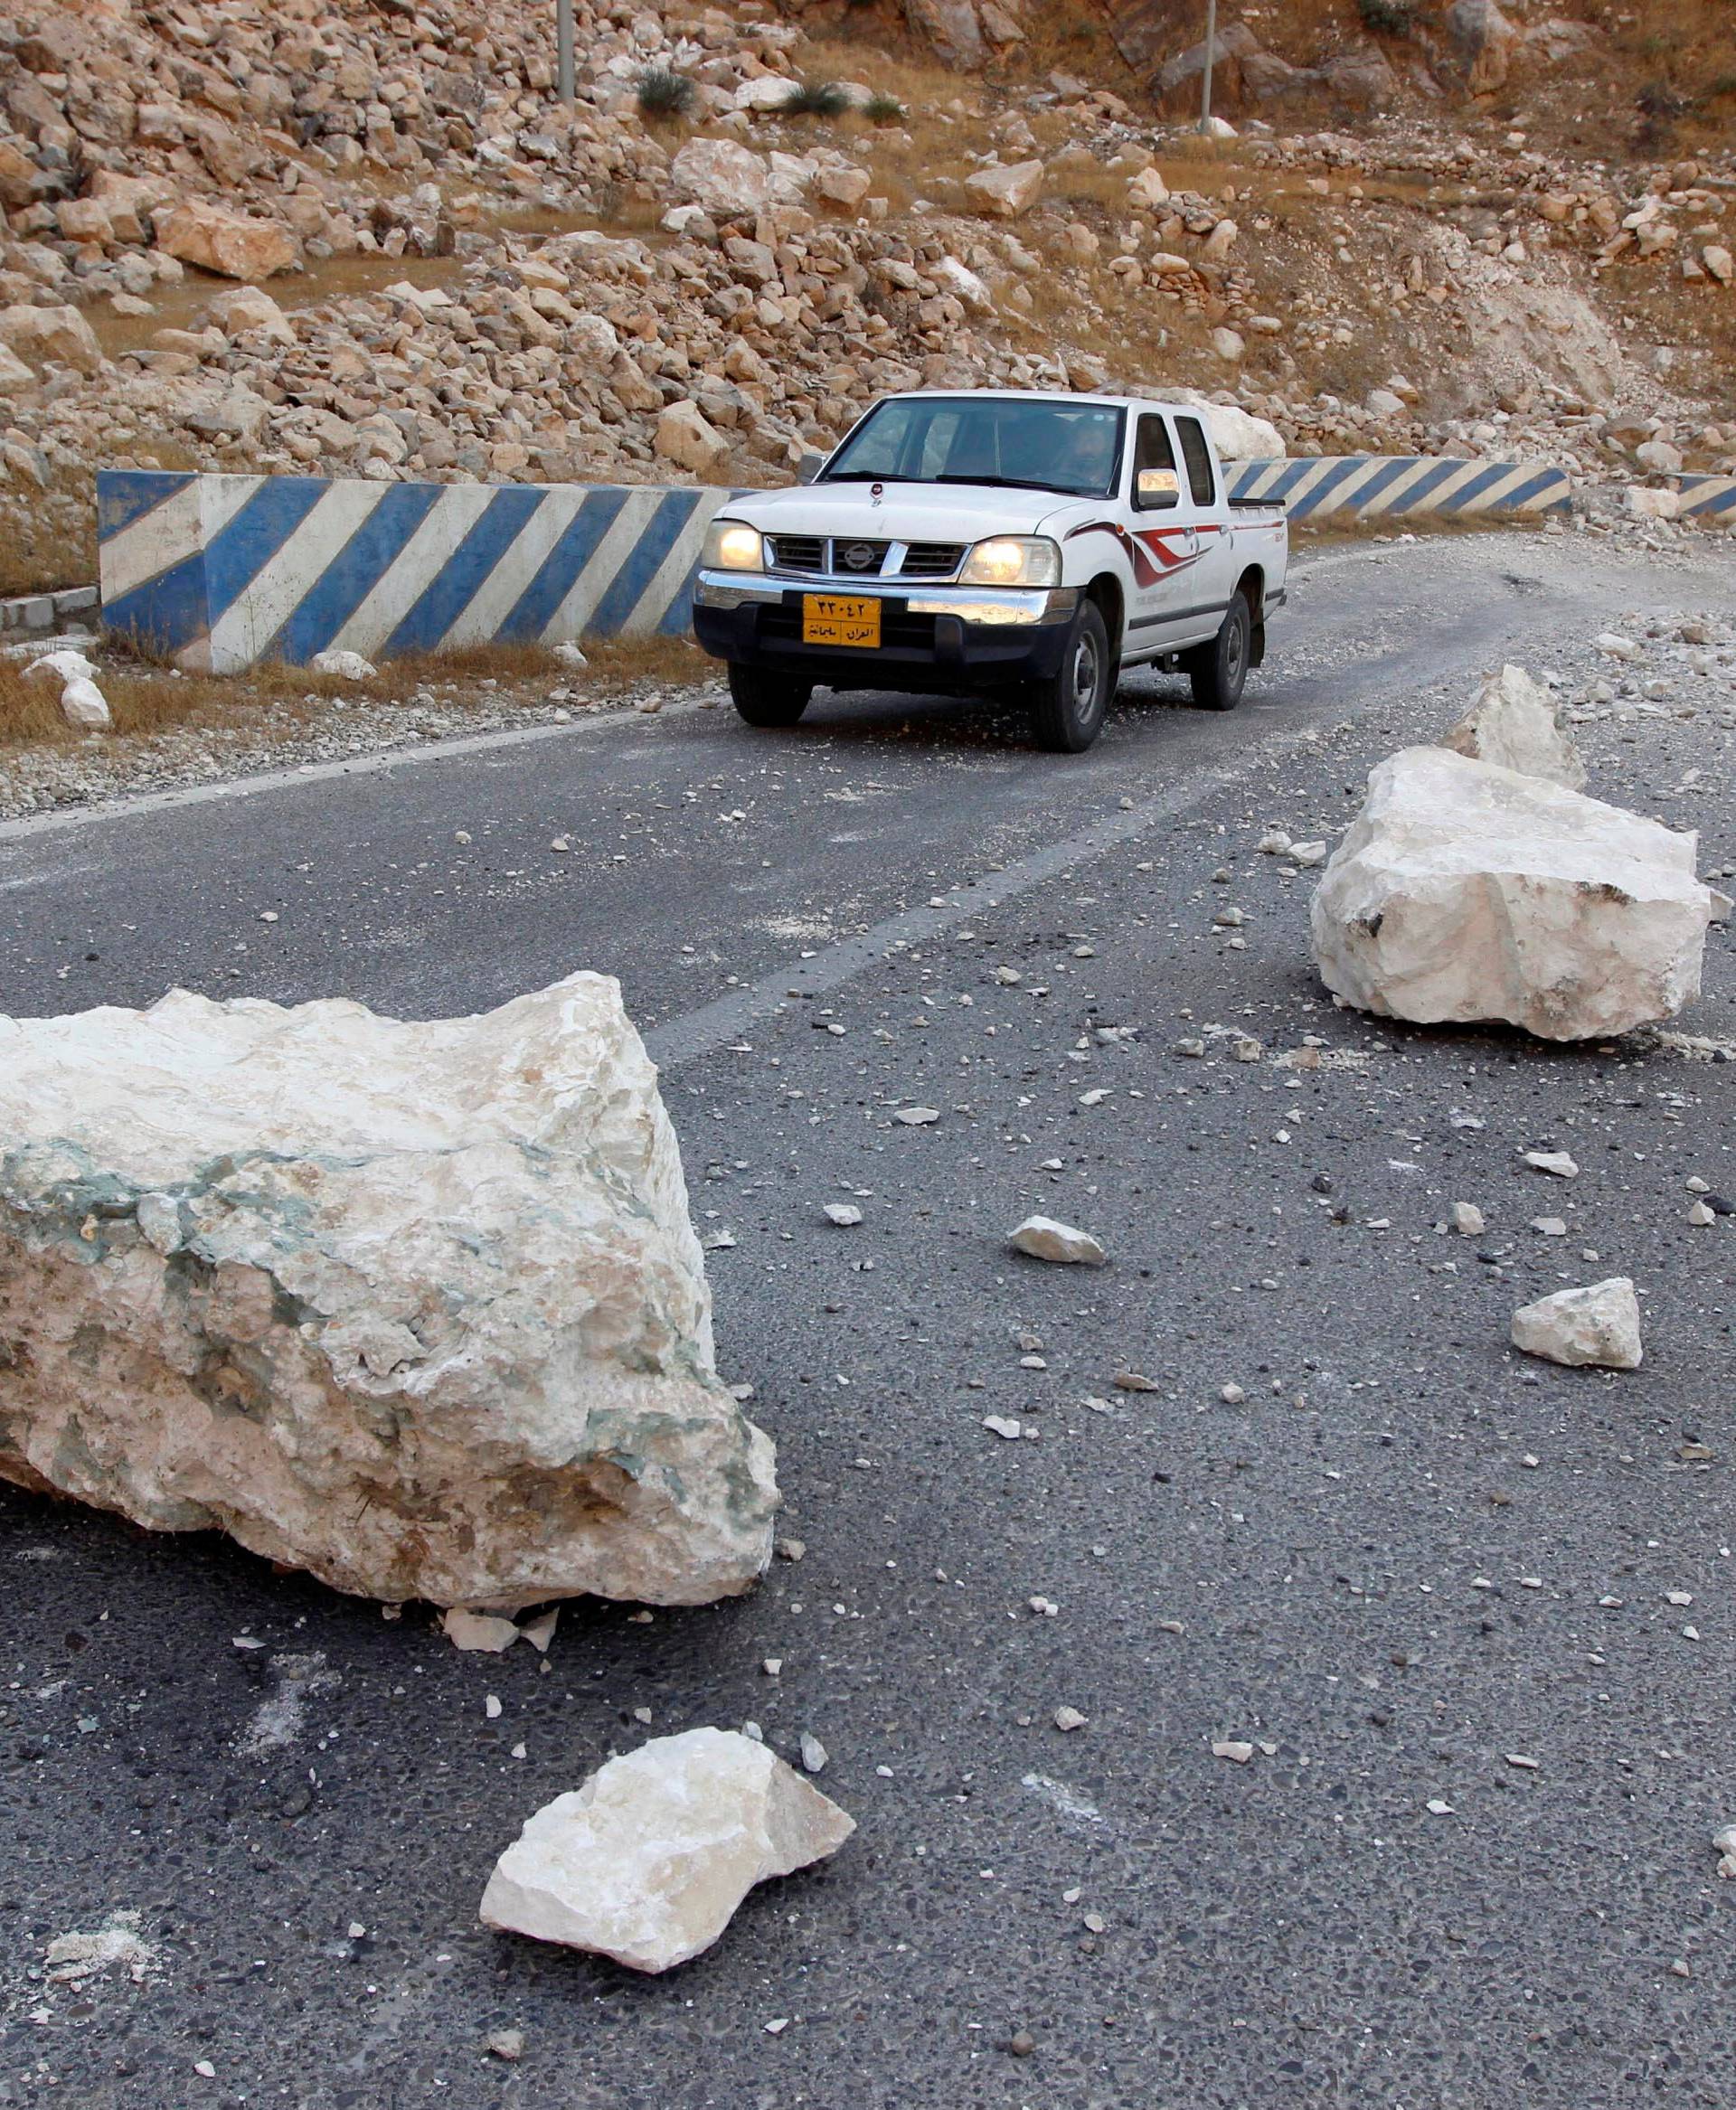 Rocks are seen on the road after an earthquake near the Darbandikhan Dam